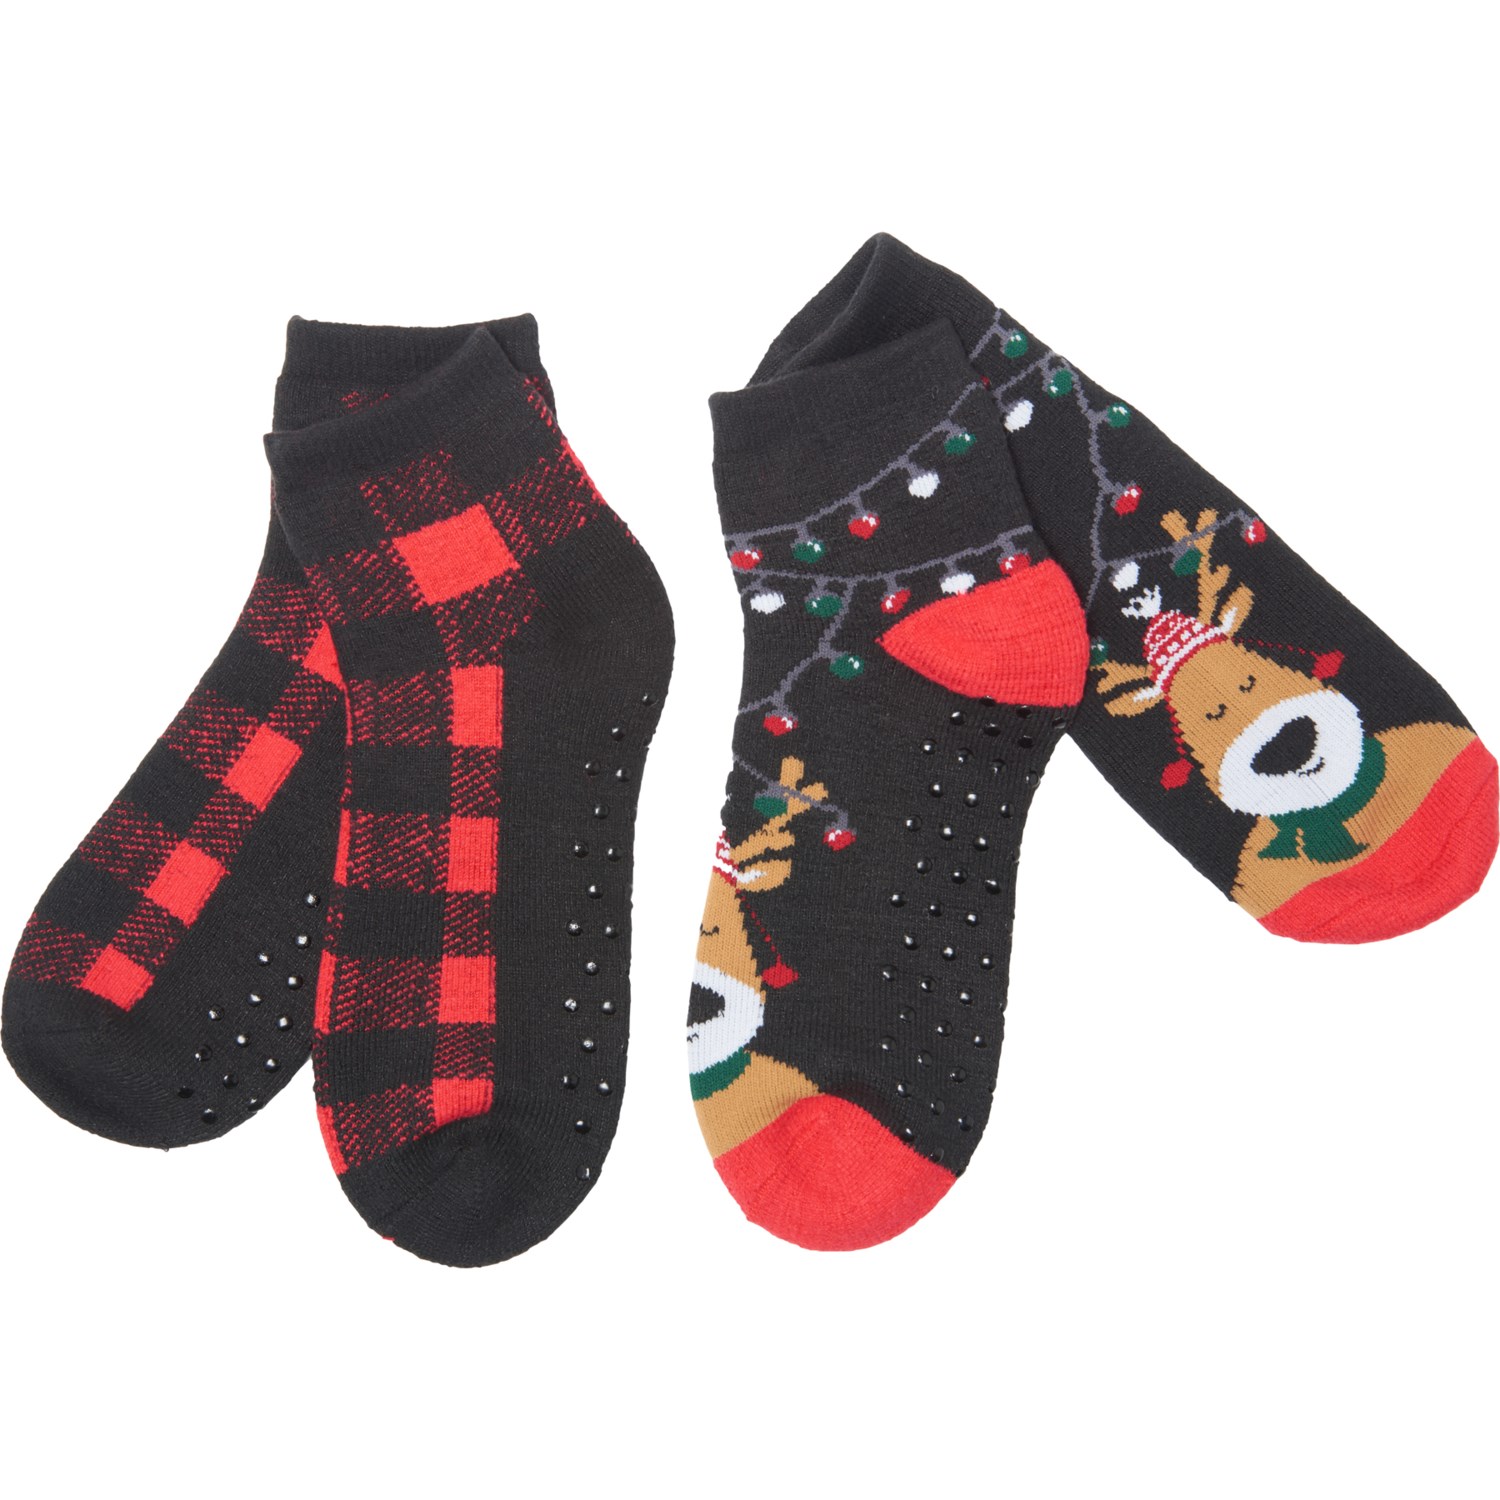 HALLMARK Terry-Lined Lounge Socks (For Women) - Save 33%